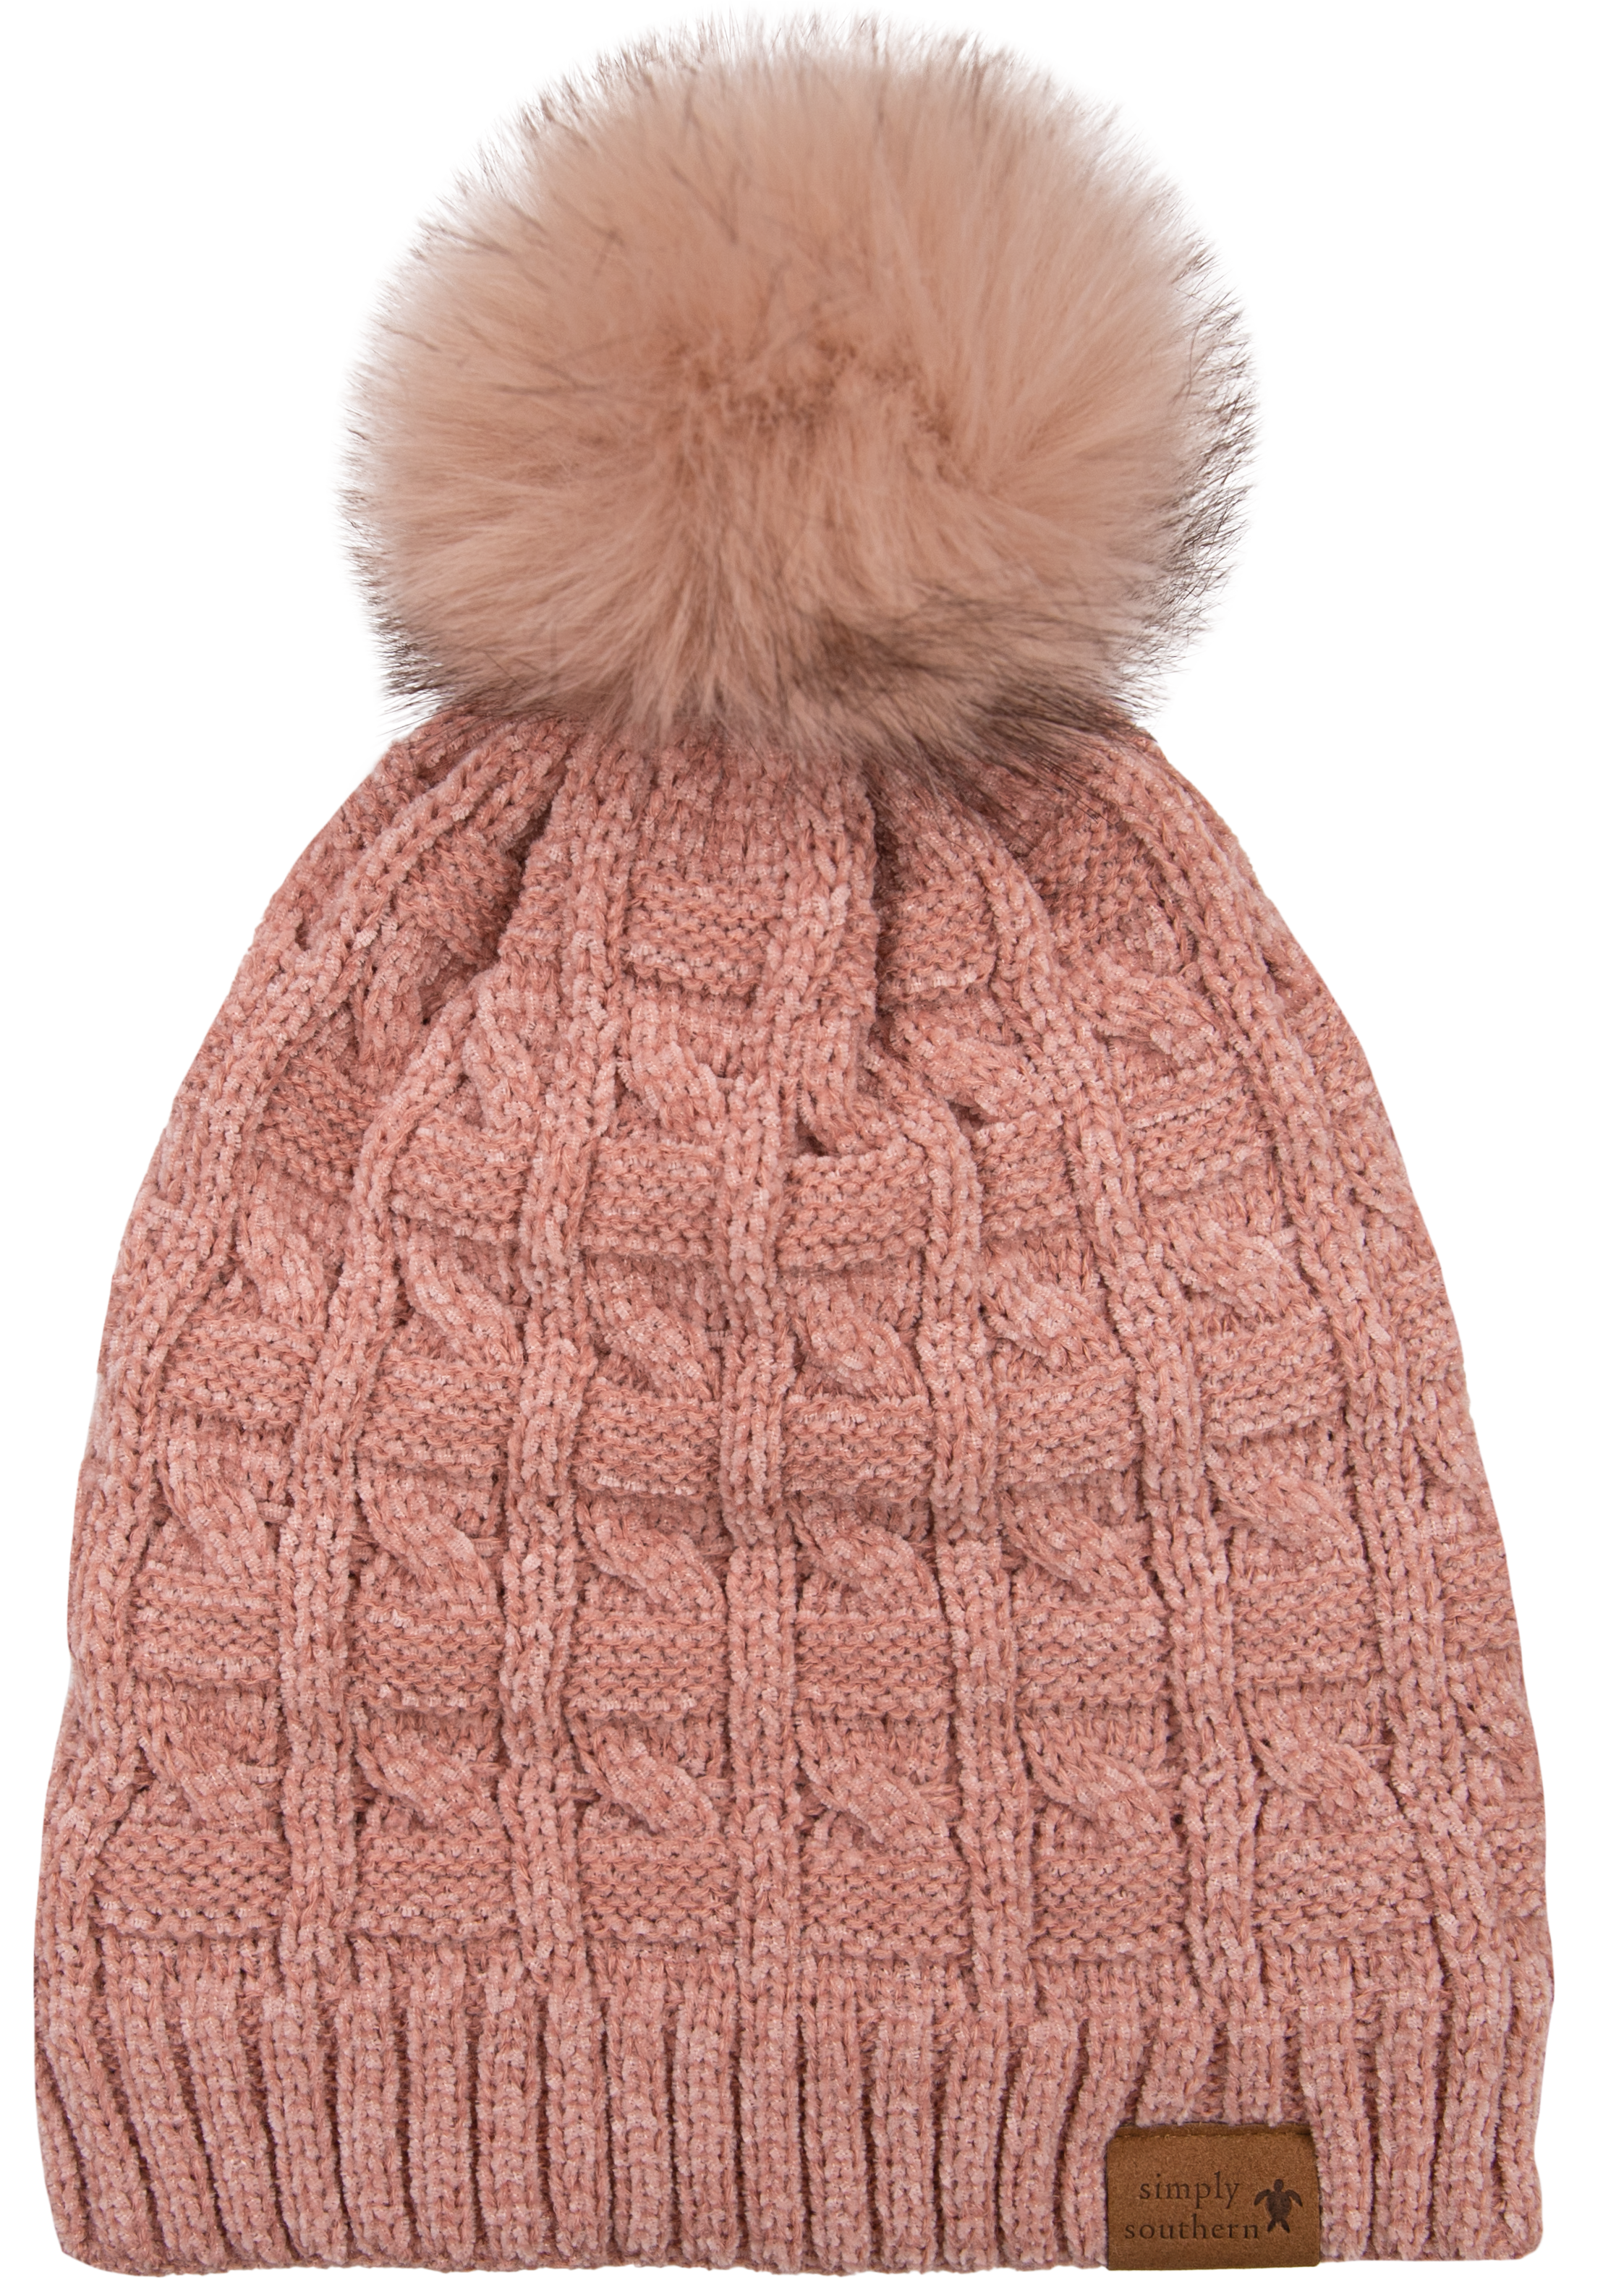 Simply Southern® - Women's Sherpa Chenille - Pink